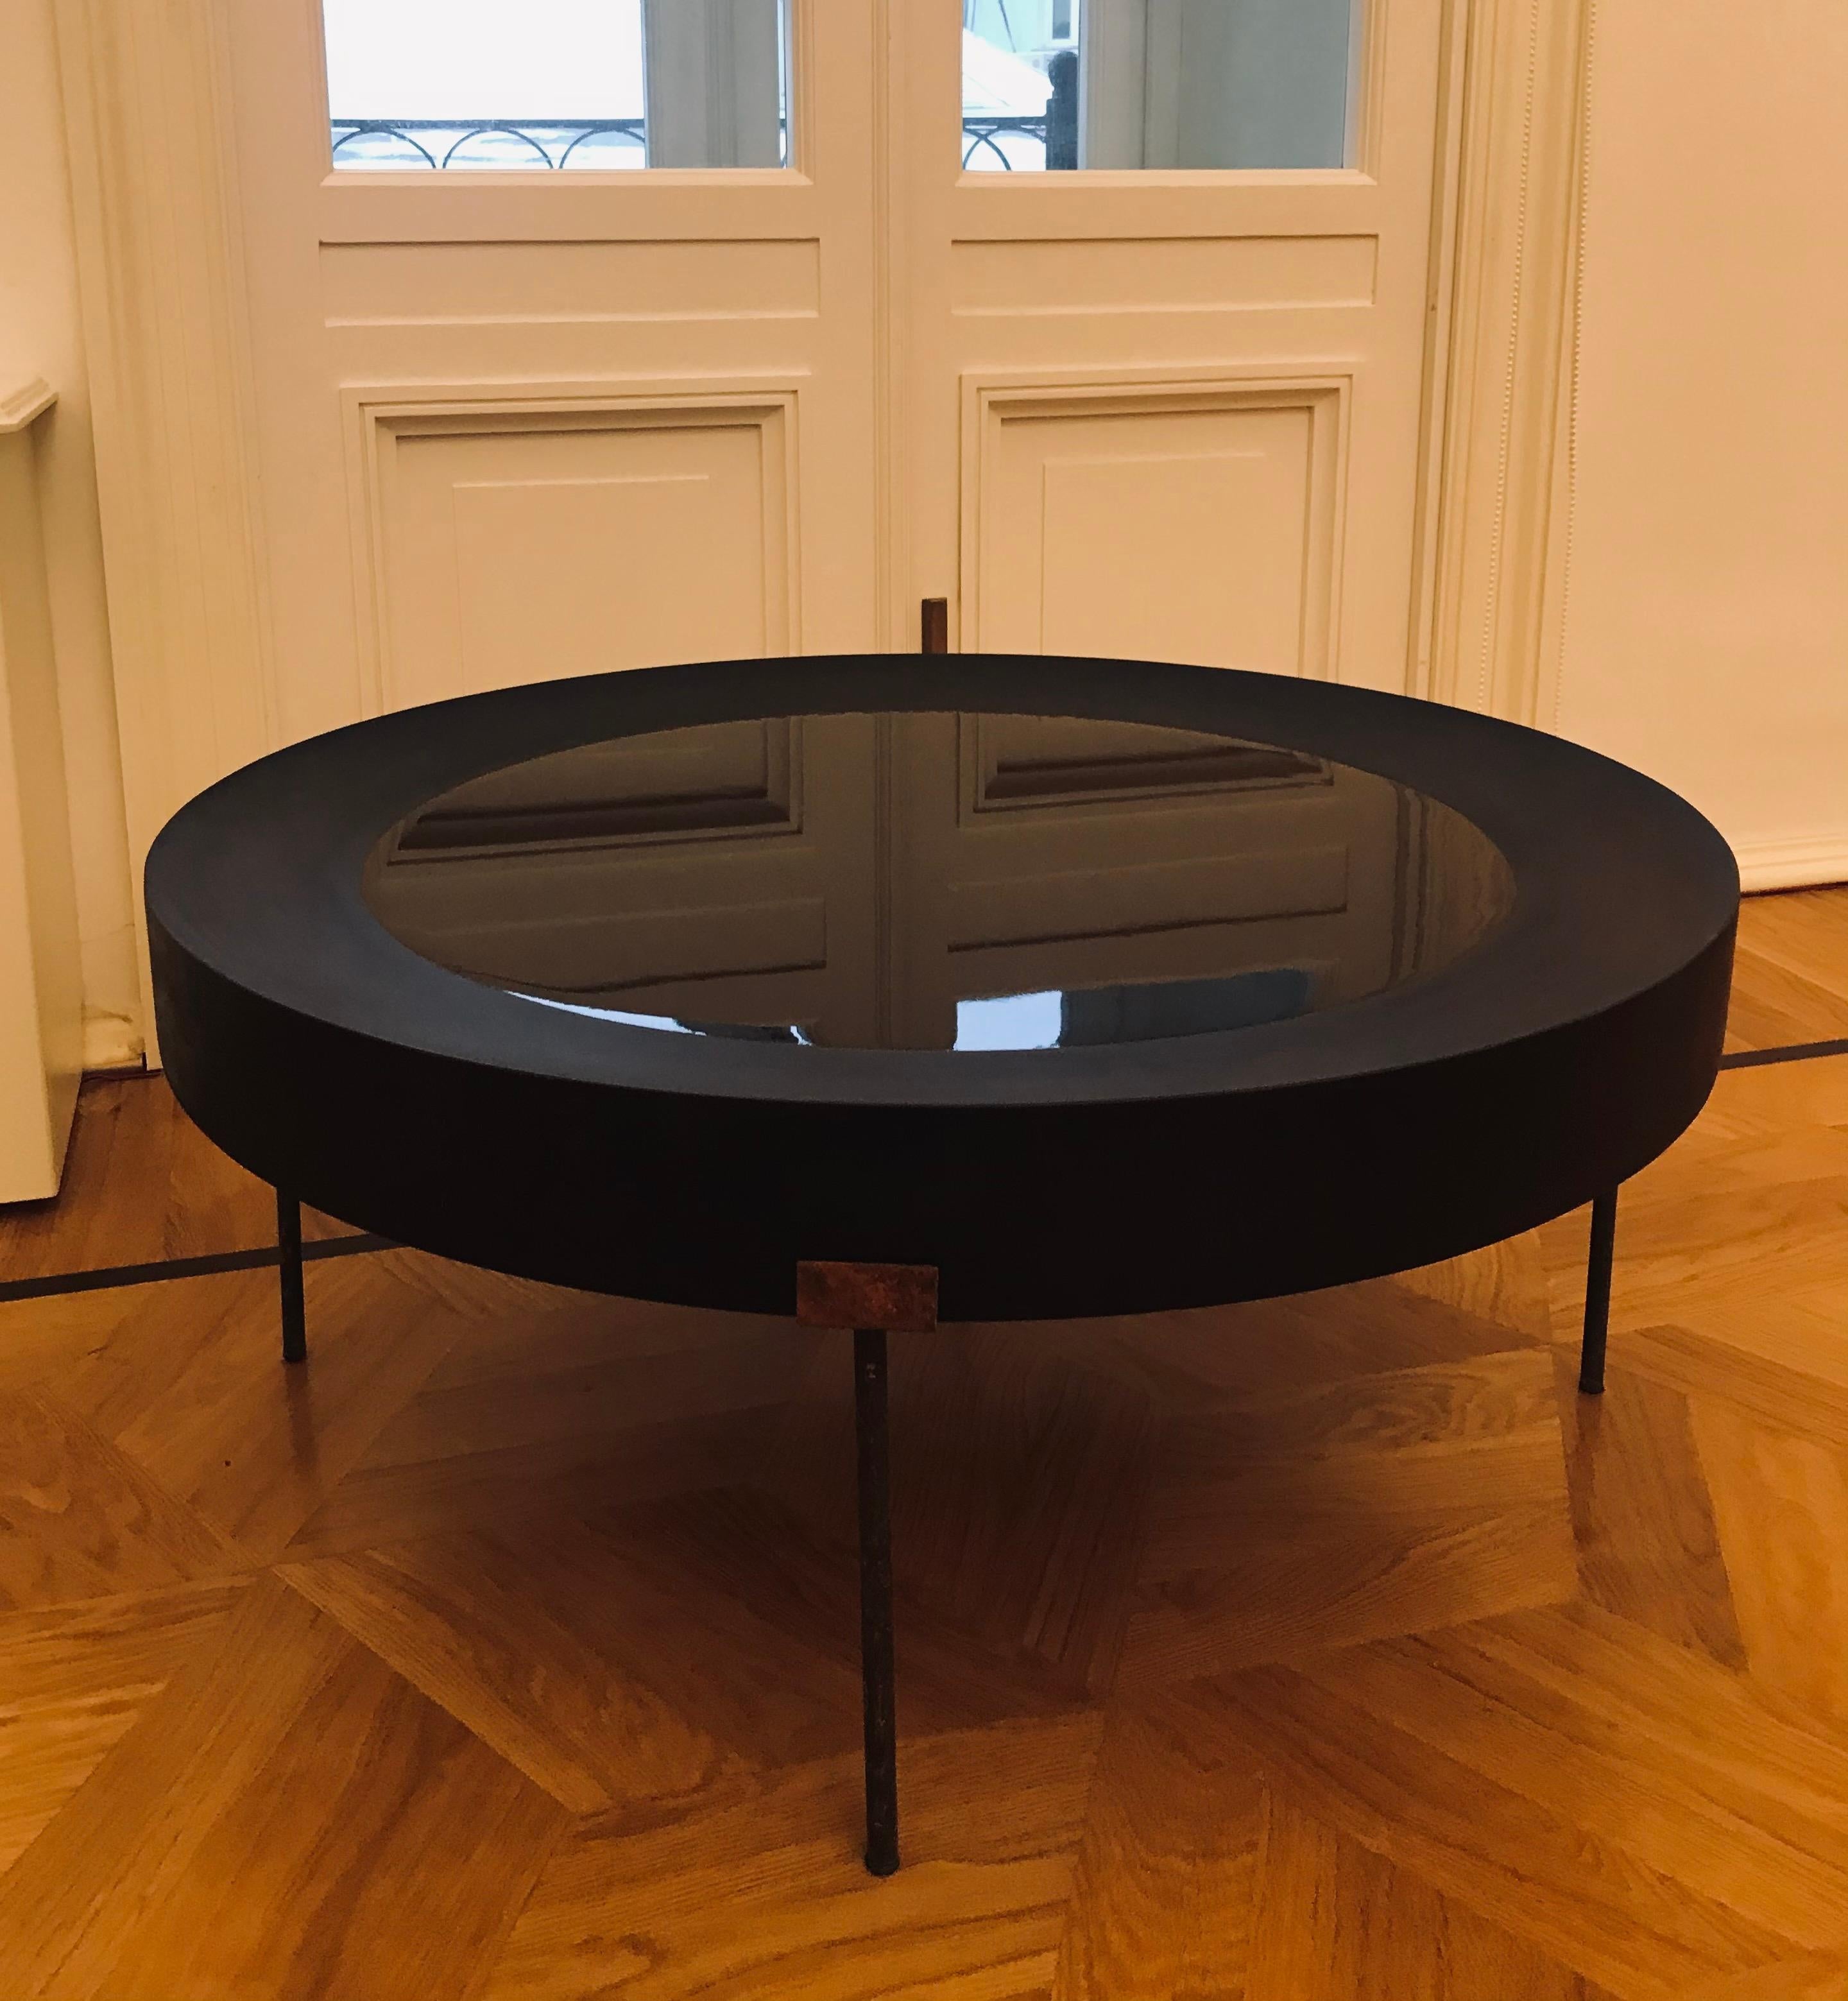 Whirpool Coffee Table by Olexandr Pinchuk
Dimensions: D 110 x H 35 cm.
Materials: Wood, iron, oil, epoxy resin.


Olexandr Pinchuk (Ukraine, 1986) Master of Laws, studied at the International Law Institute and Plekhanov Russian University of